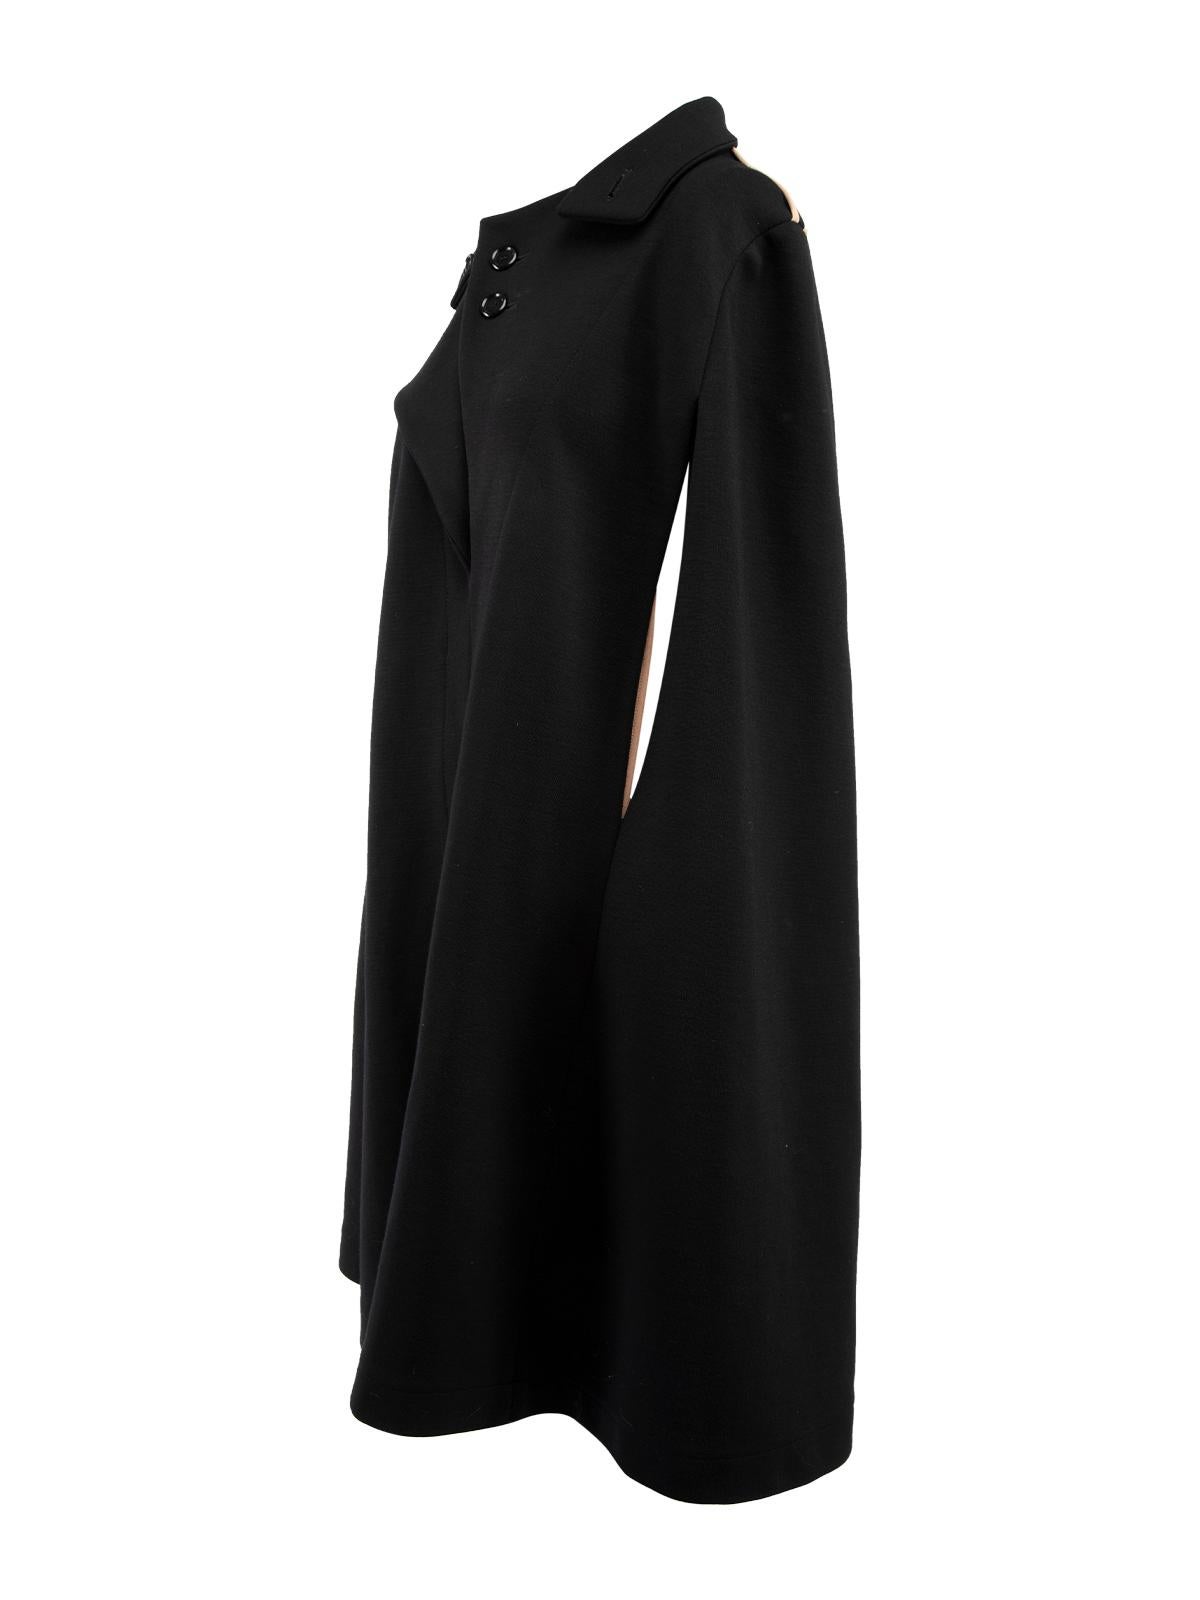 Pre-Loved Marni Women's Longline Collared Cape Coat In Excellent Condition In London, GB